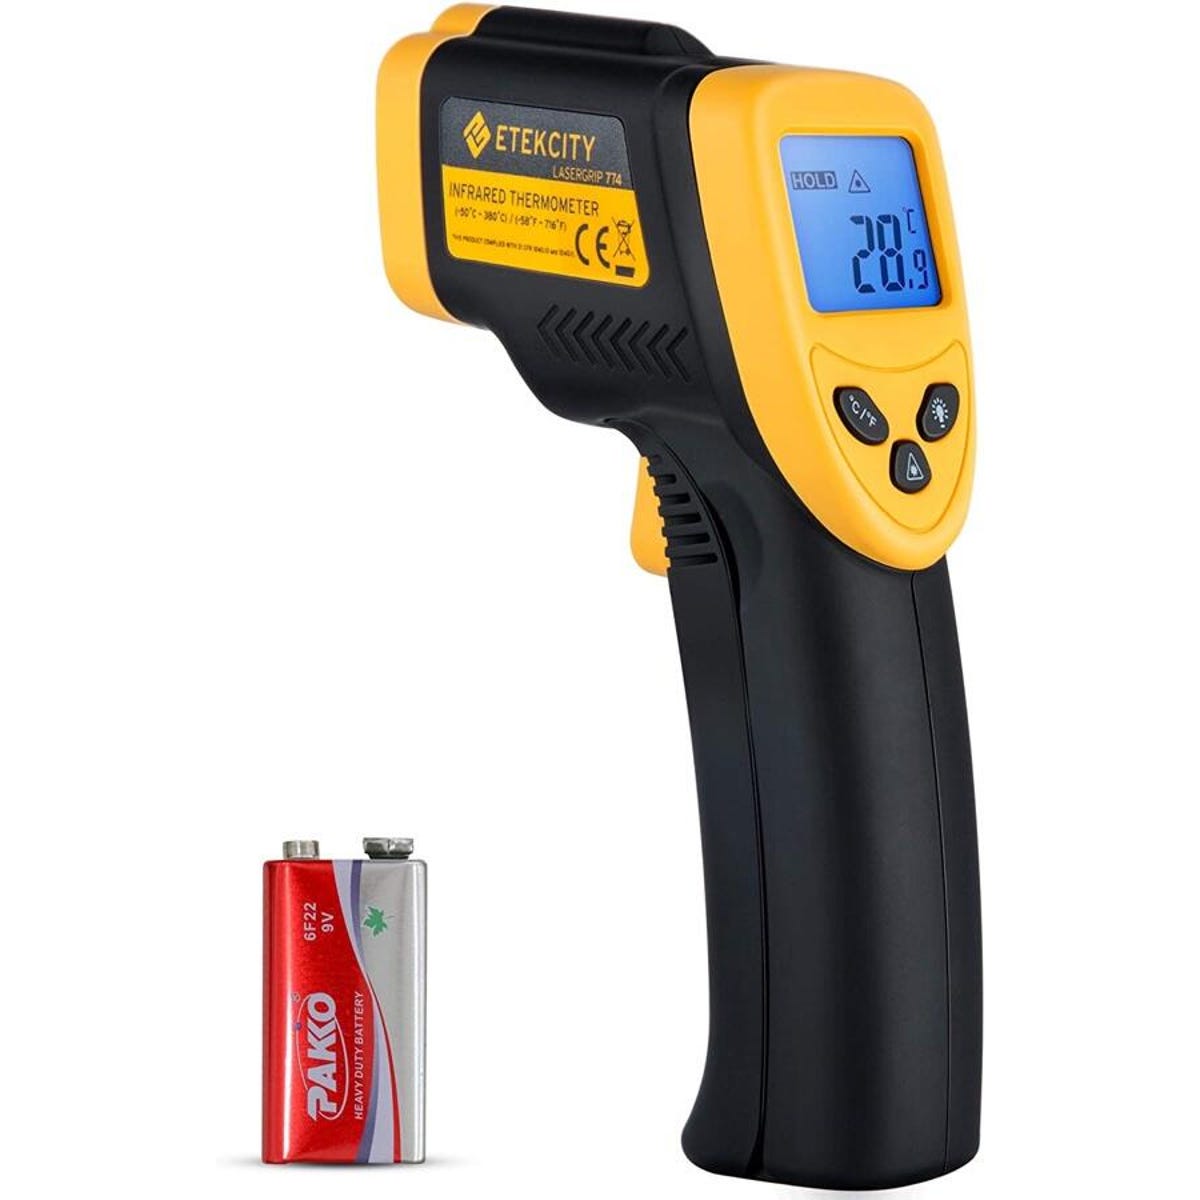 Get an infrared thermometer for your home for $23 today - CNET